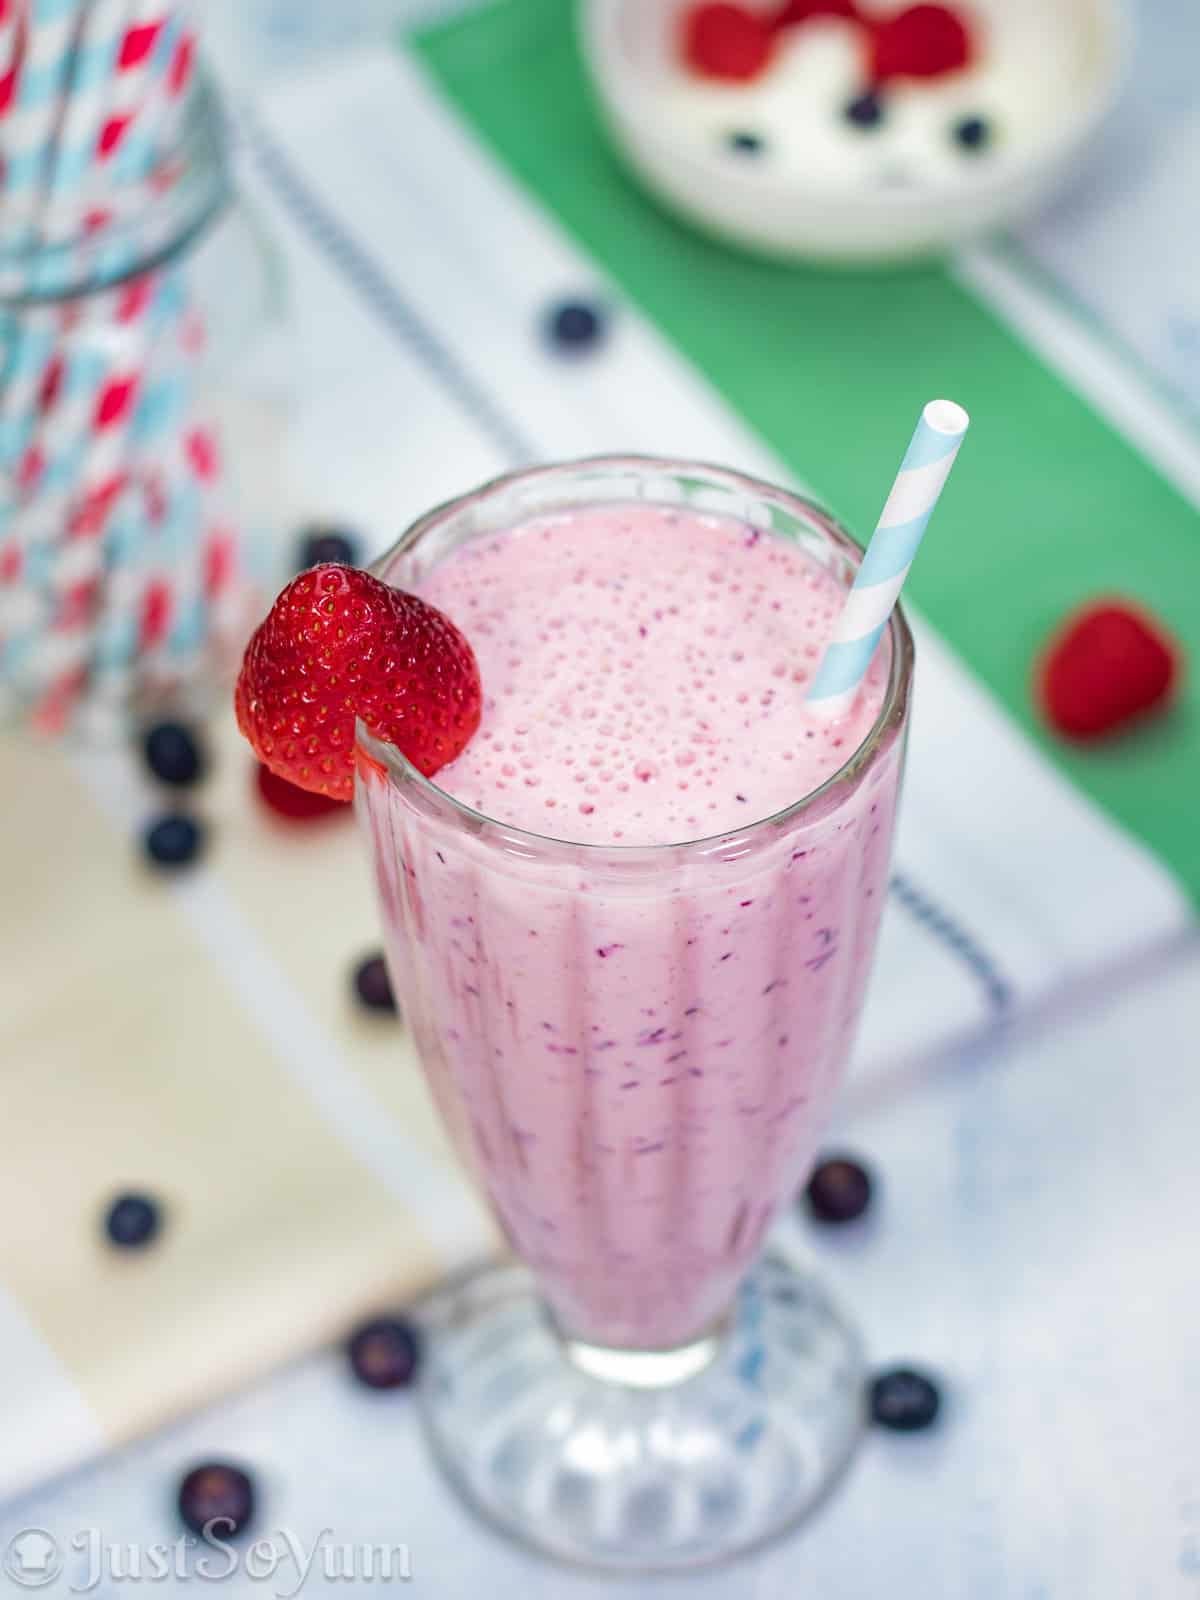 website-featured-image-for-raspberry-and-blueberry-smoothie